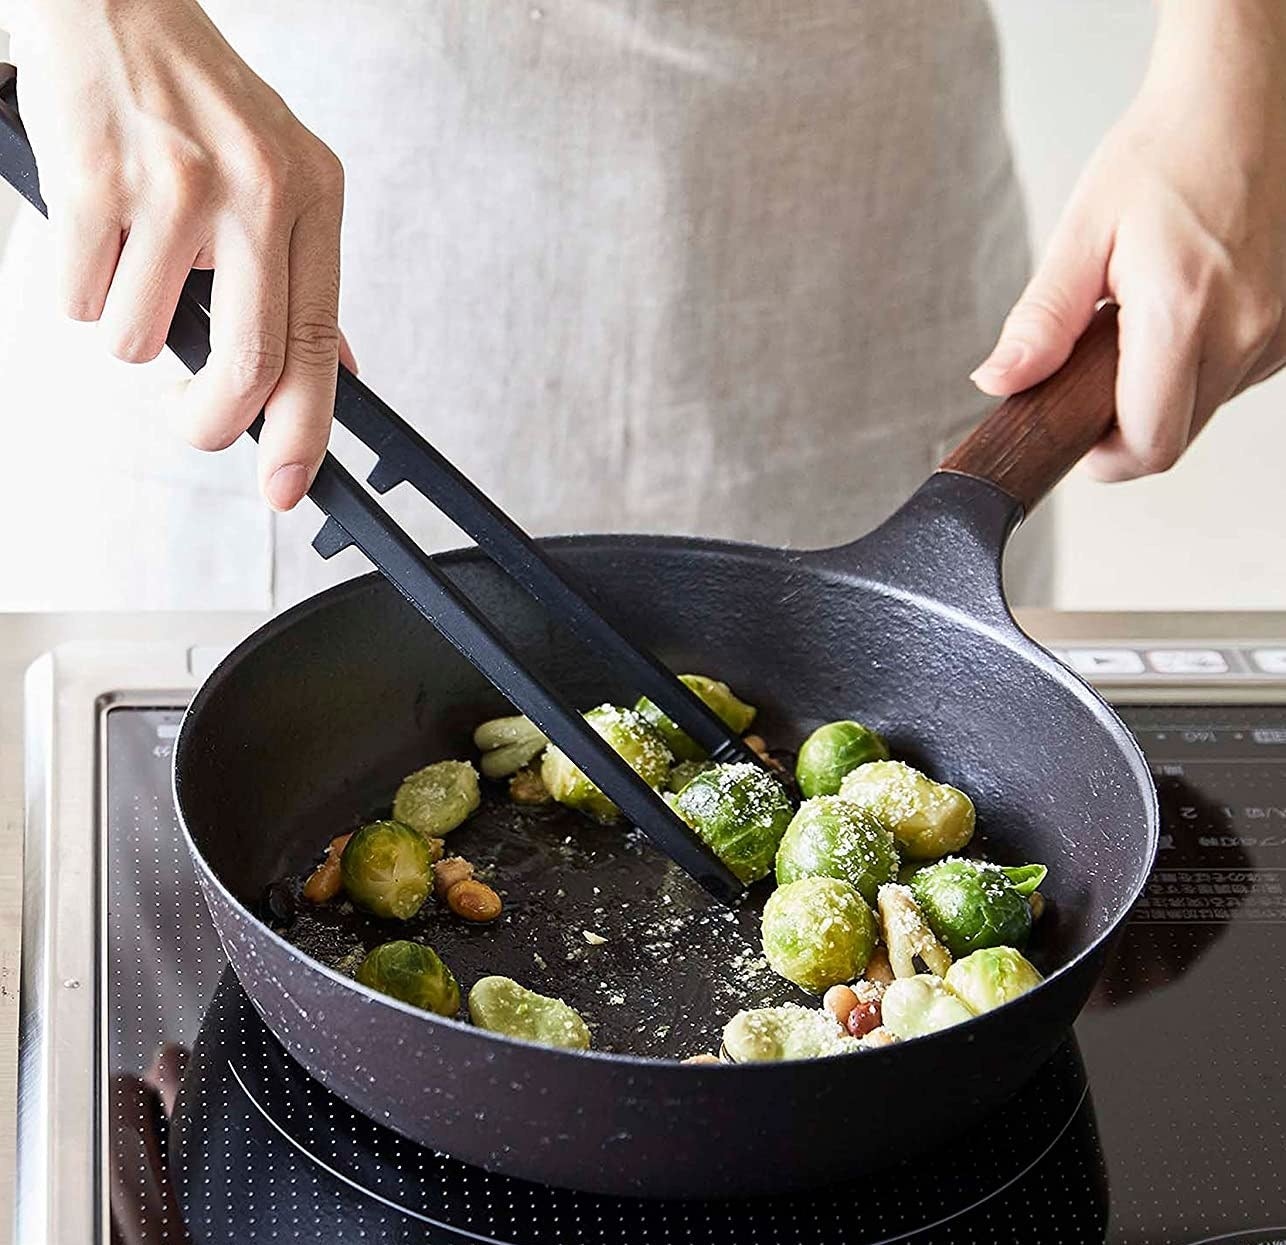 a person using the kitchen tongs to stir brussels sprouts